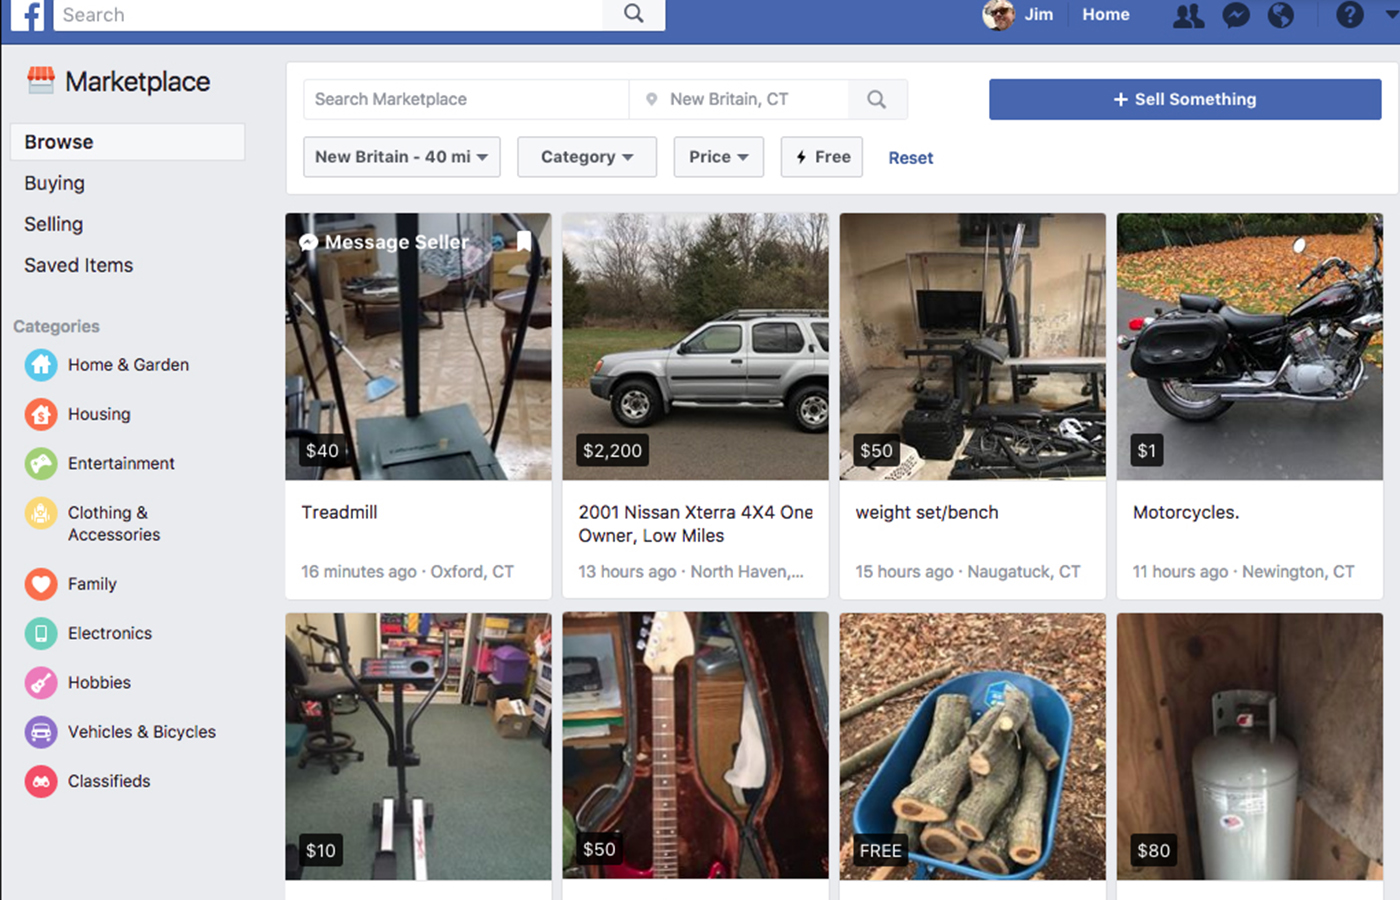 A Facebook marketplace auto listing software